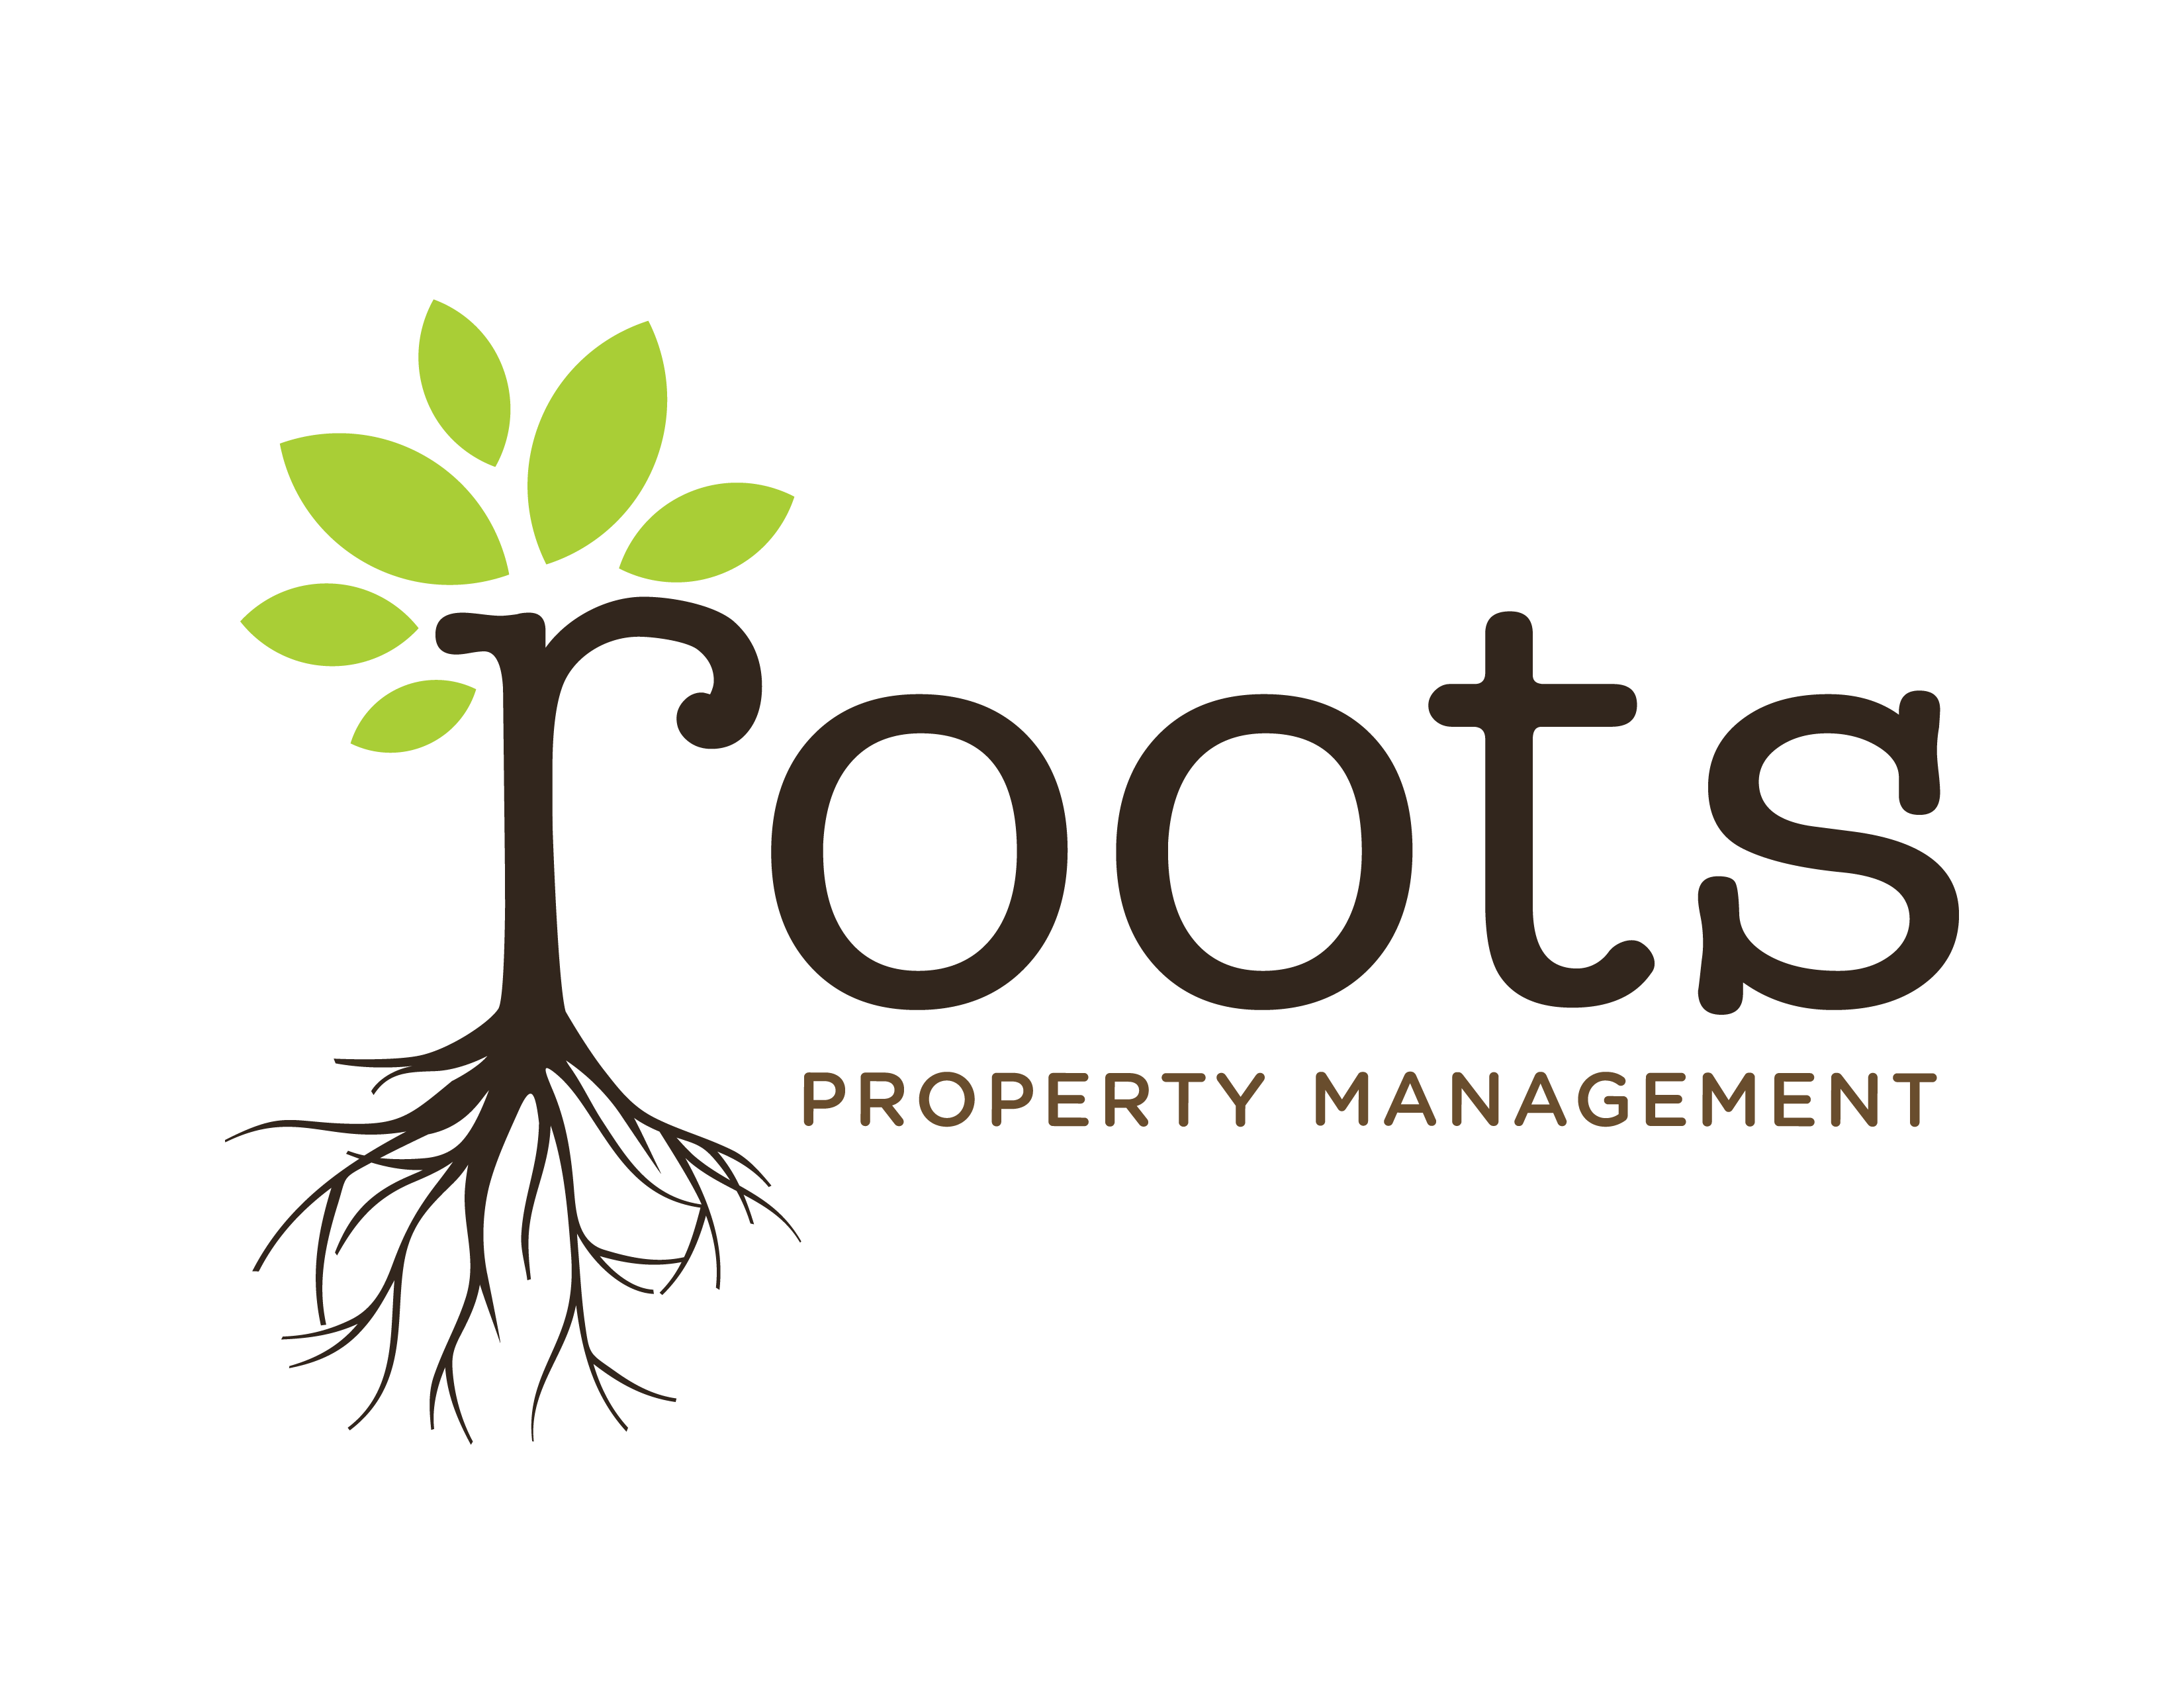 Roots Logo - Roots Logos